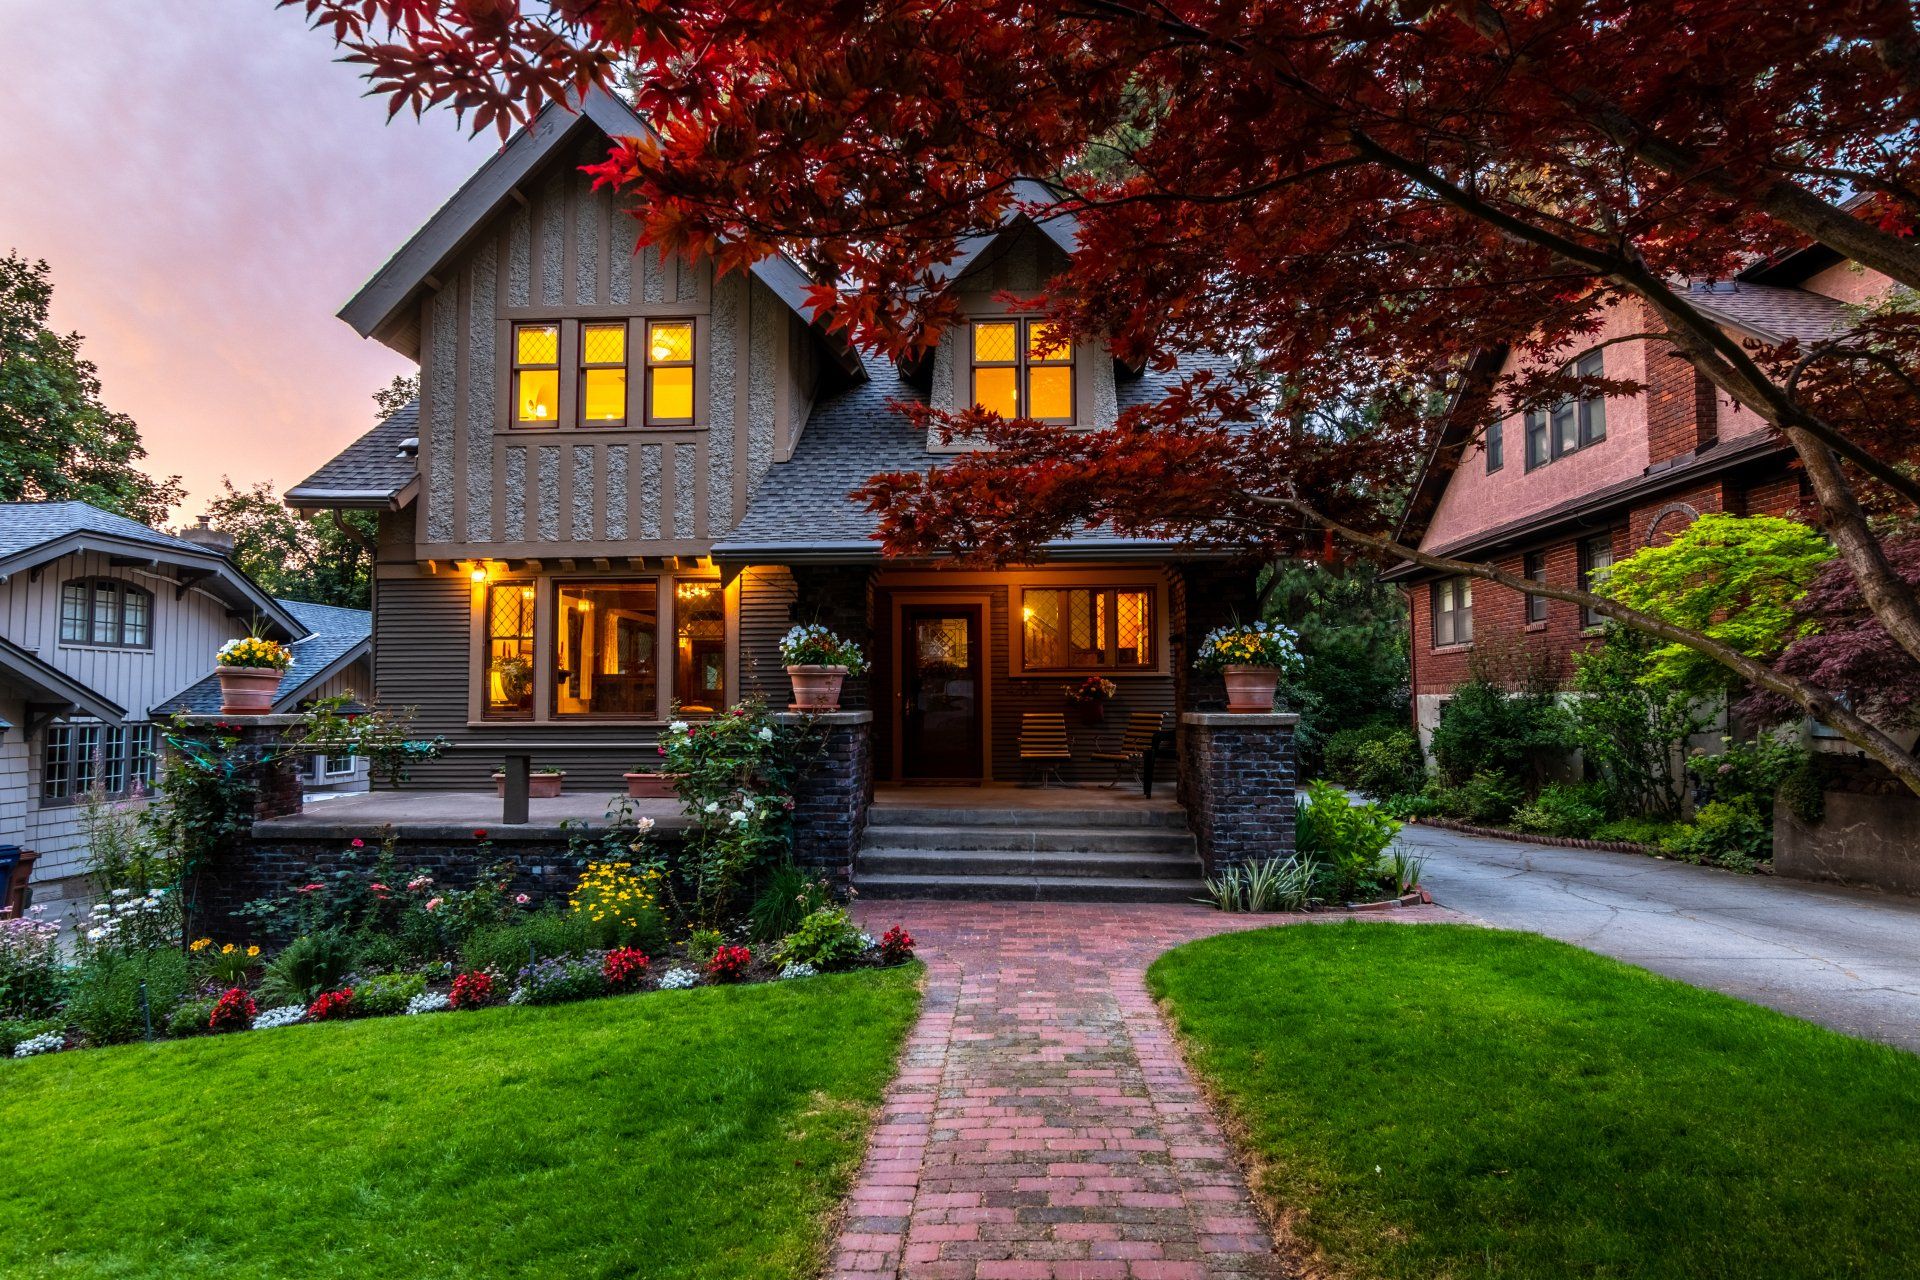 A two-story house during twilight with illuminated windows, featuring a gabled roof and a porch.